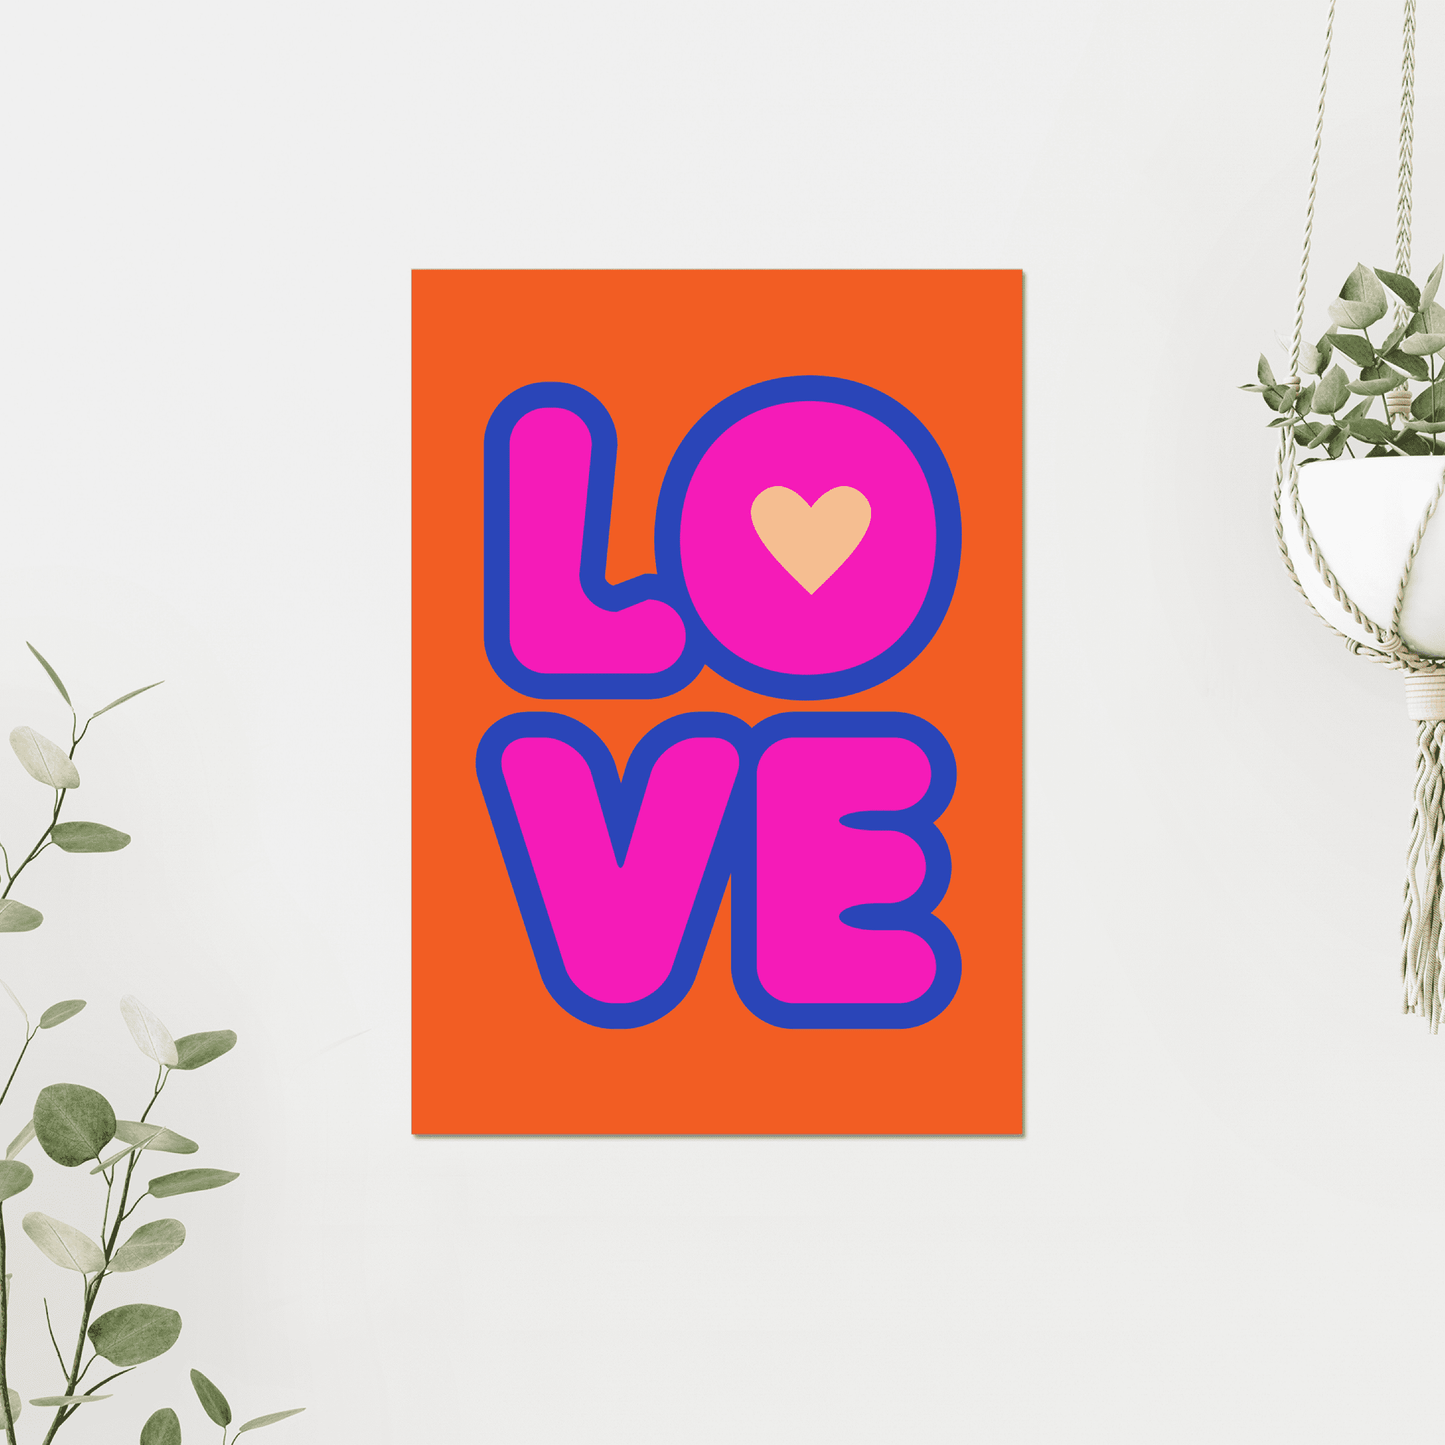 We LOVE this bright and bold typography print. A statement mix of orange, pink and blue. This quirky and colourful design is sure to make an impact, and will definitely get your visitors asking where you've been shopping... make sure you tell them, Cuddles In The Kitchen!